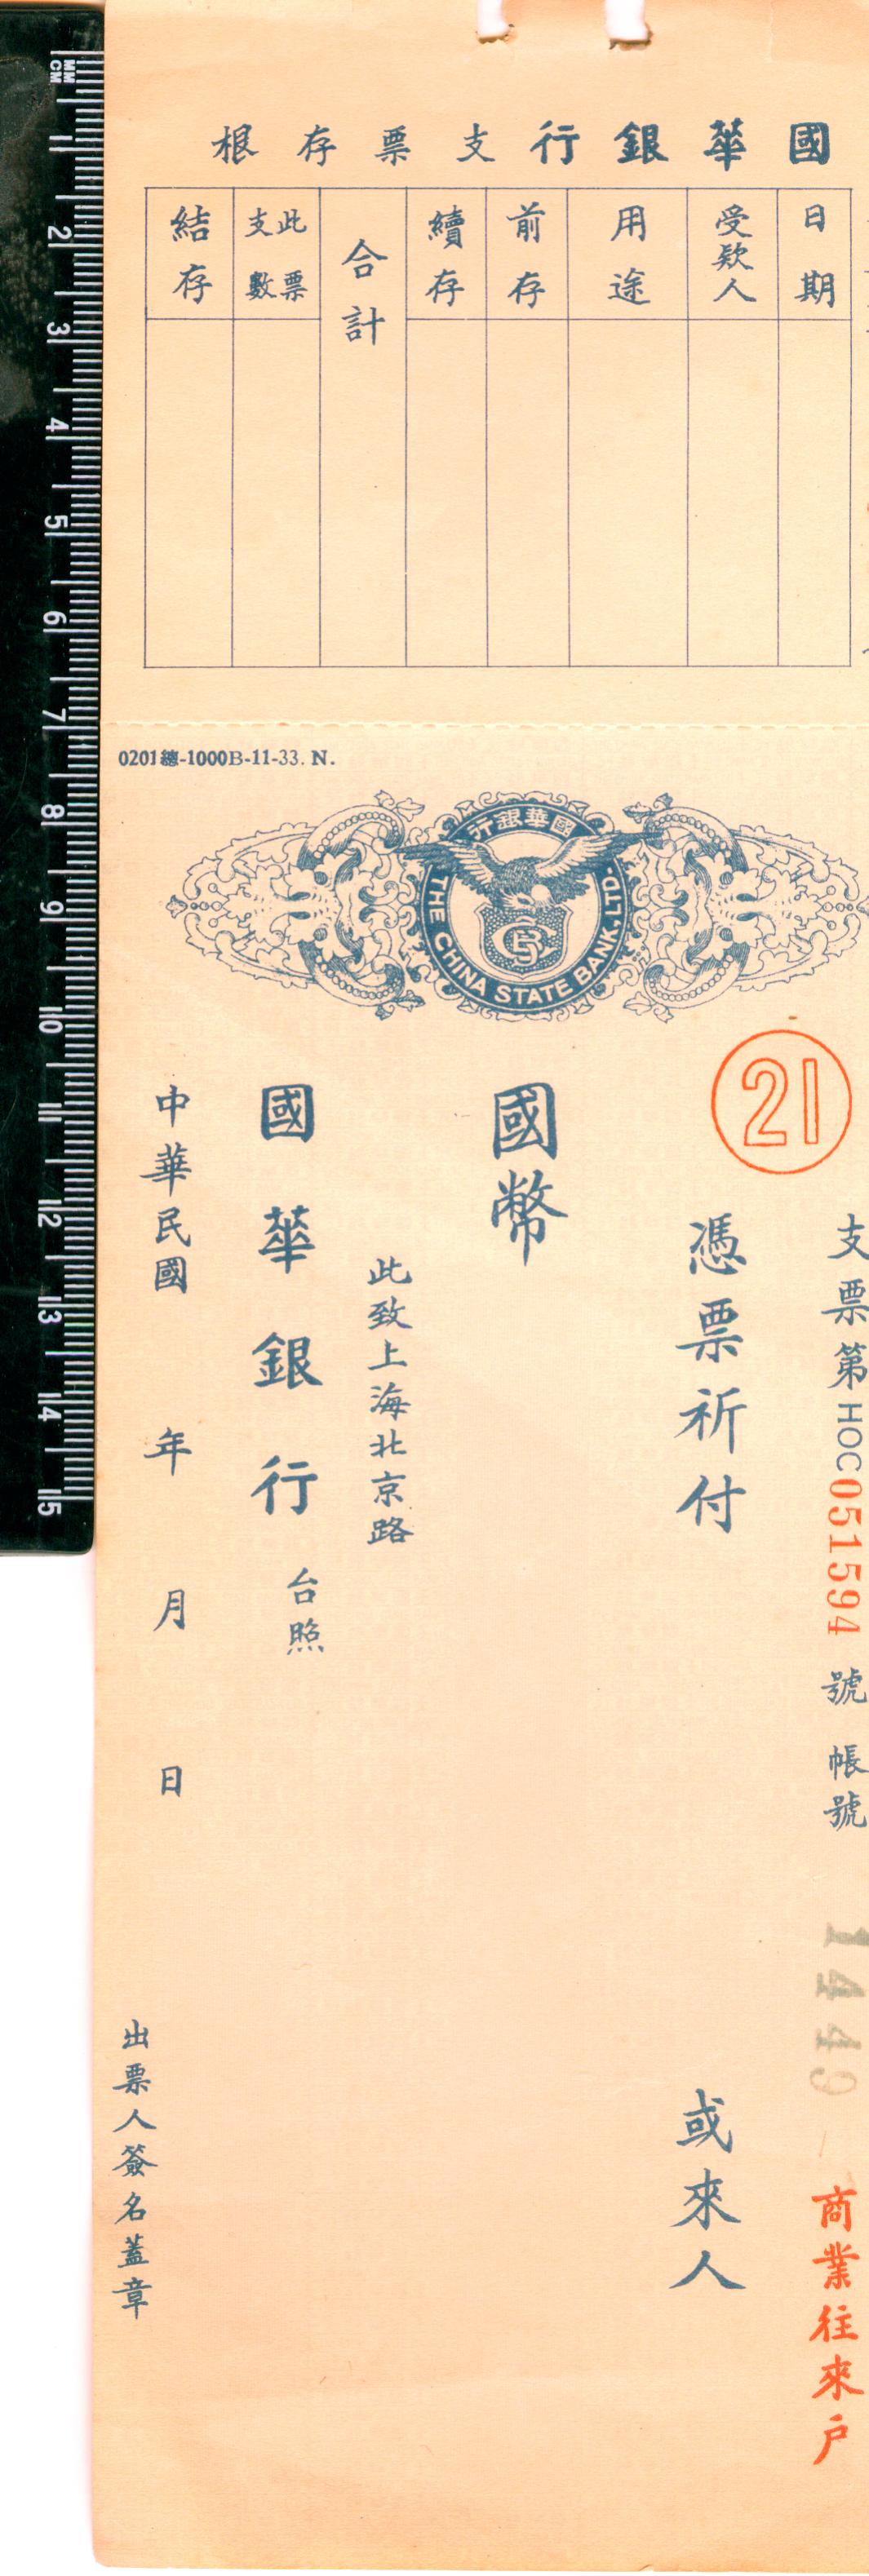 D1745, Check of The China State Bank, Shanghai 1940's unused